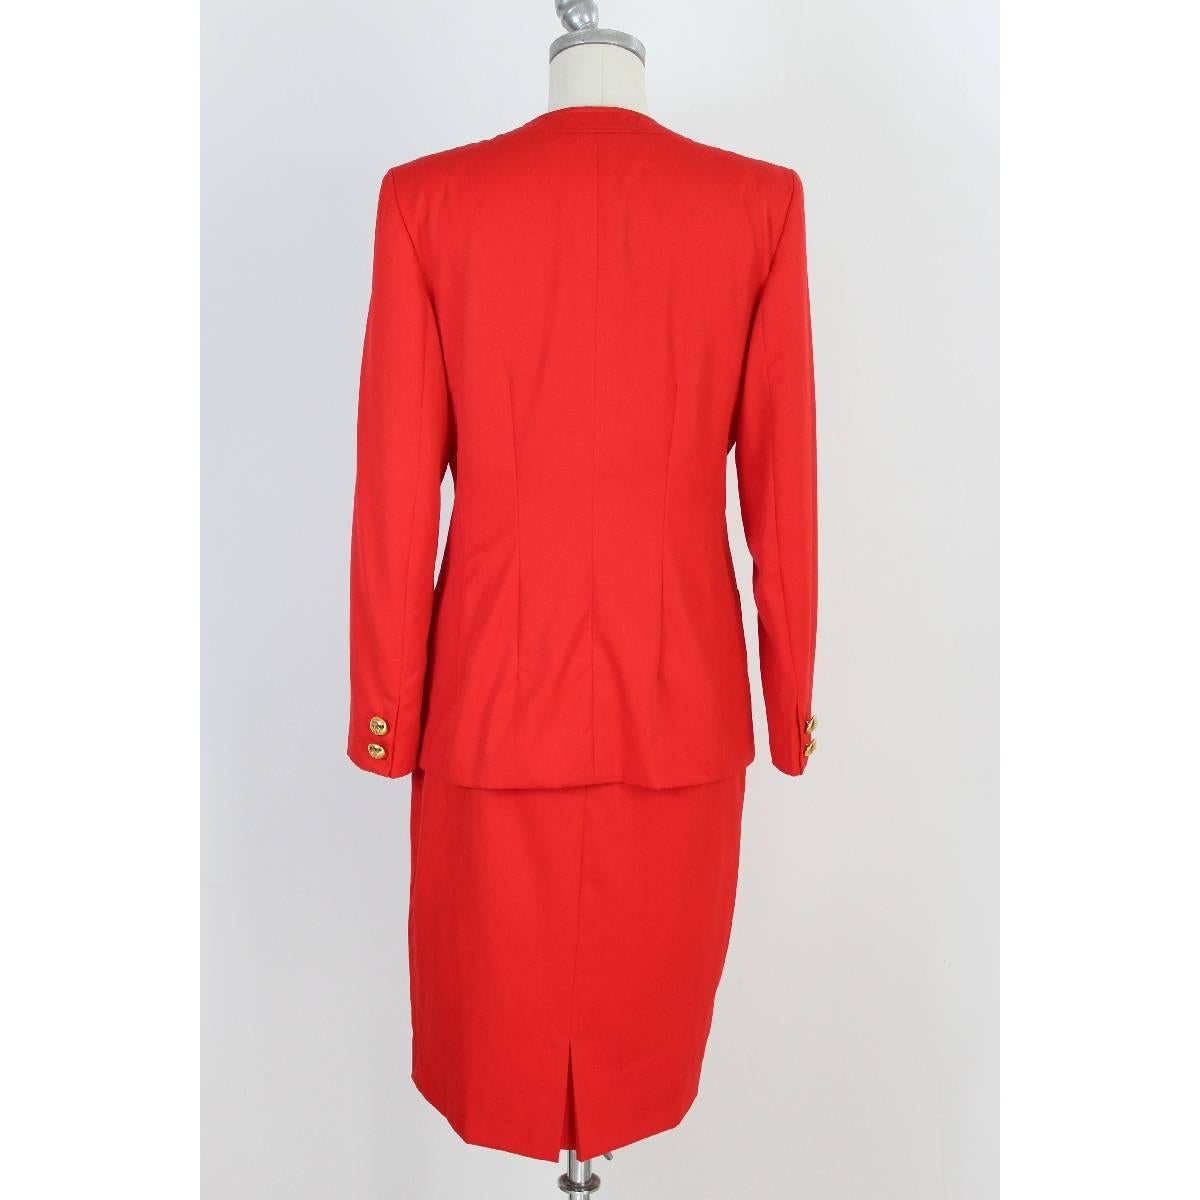 Valentino miss V vintage red women’s skirt suit. Beautiful red Valentino. The jacket slim fit with four pockets. Golden buttons with logo. Fully lined jacket and skirt. Size 44 made in italy, new with label.

Size: 44 IT 10 US 12 UK

Shoulder: 44